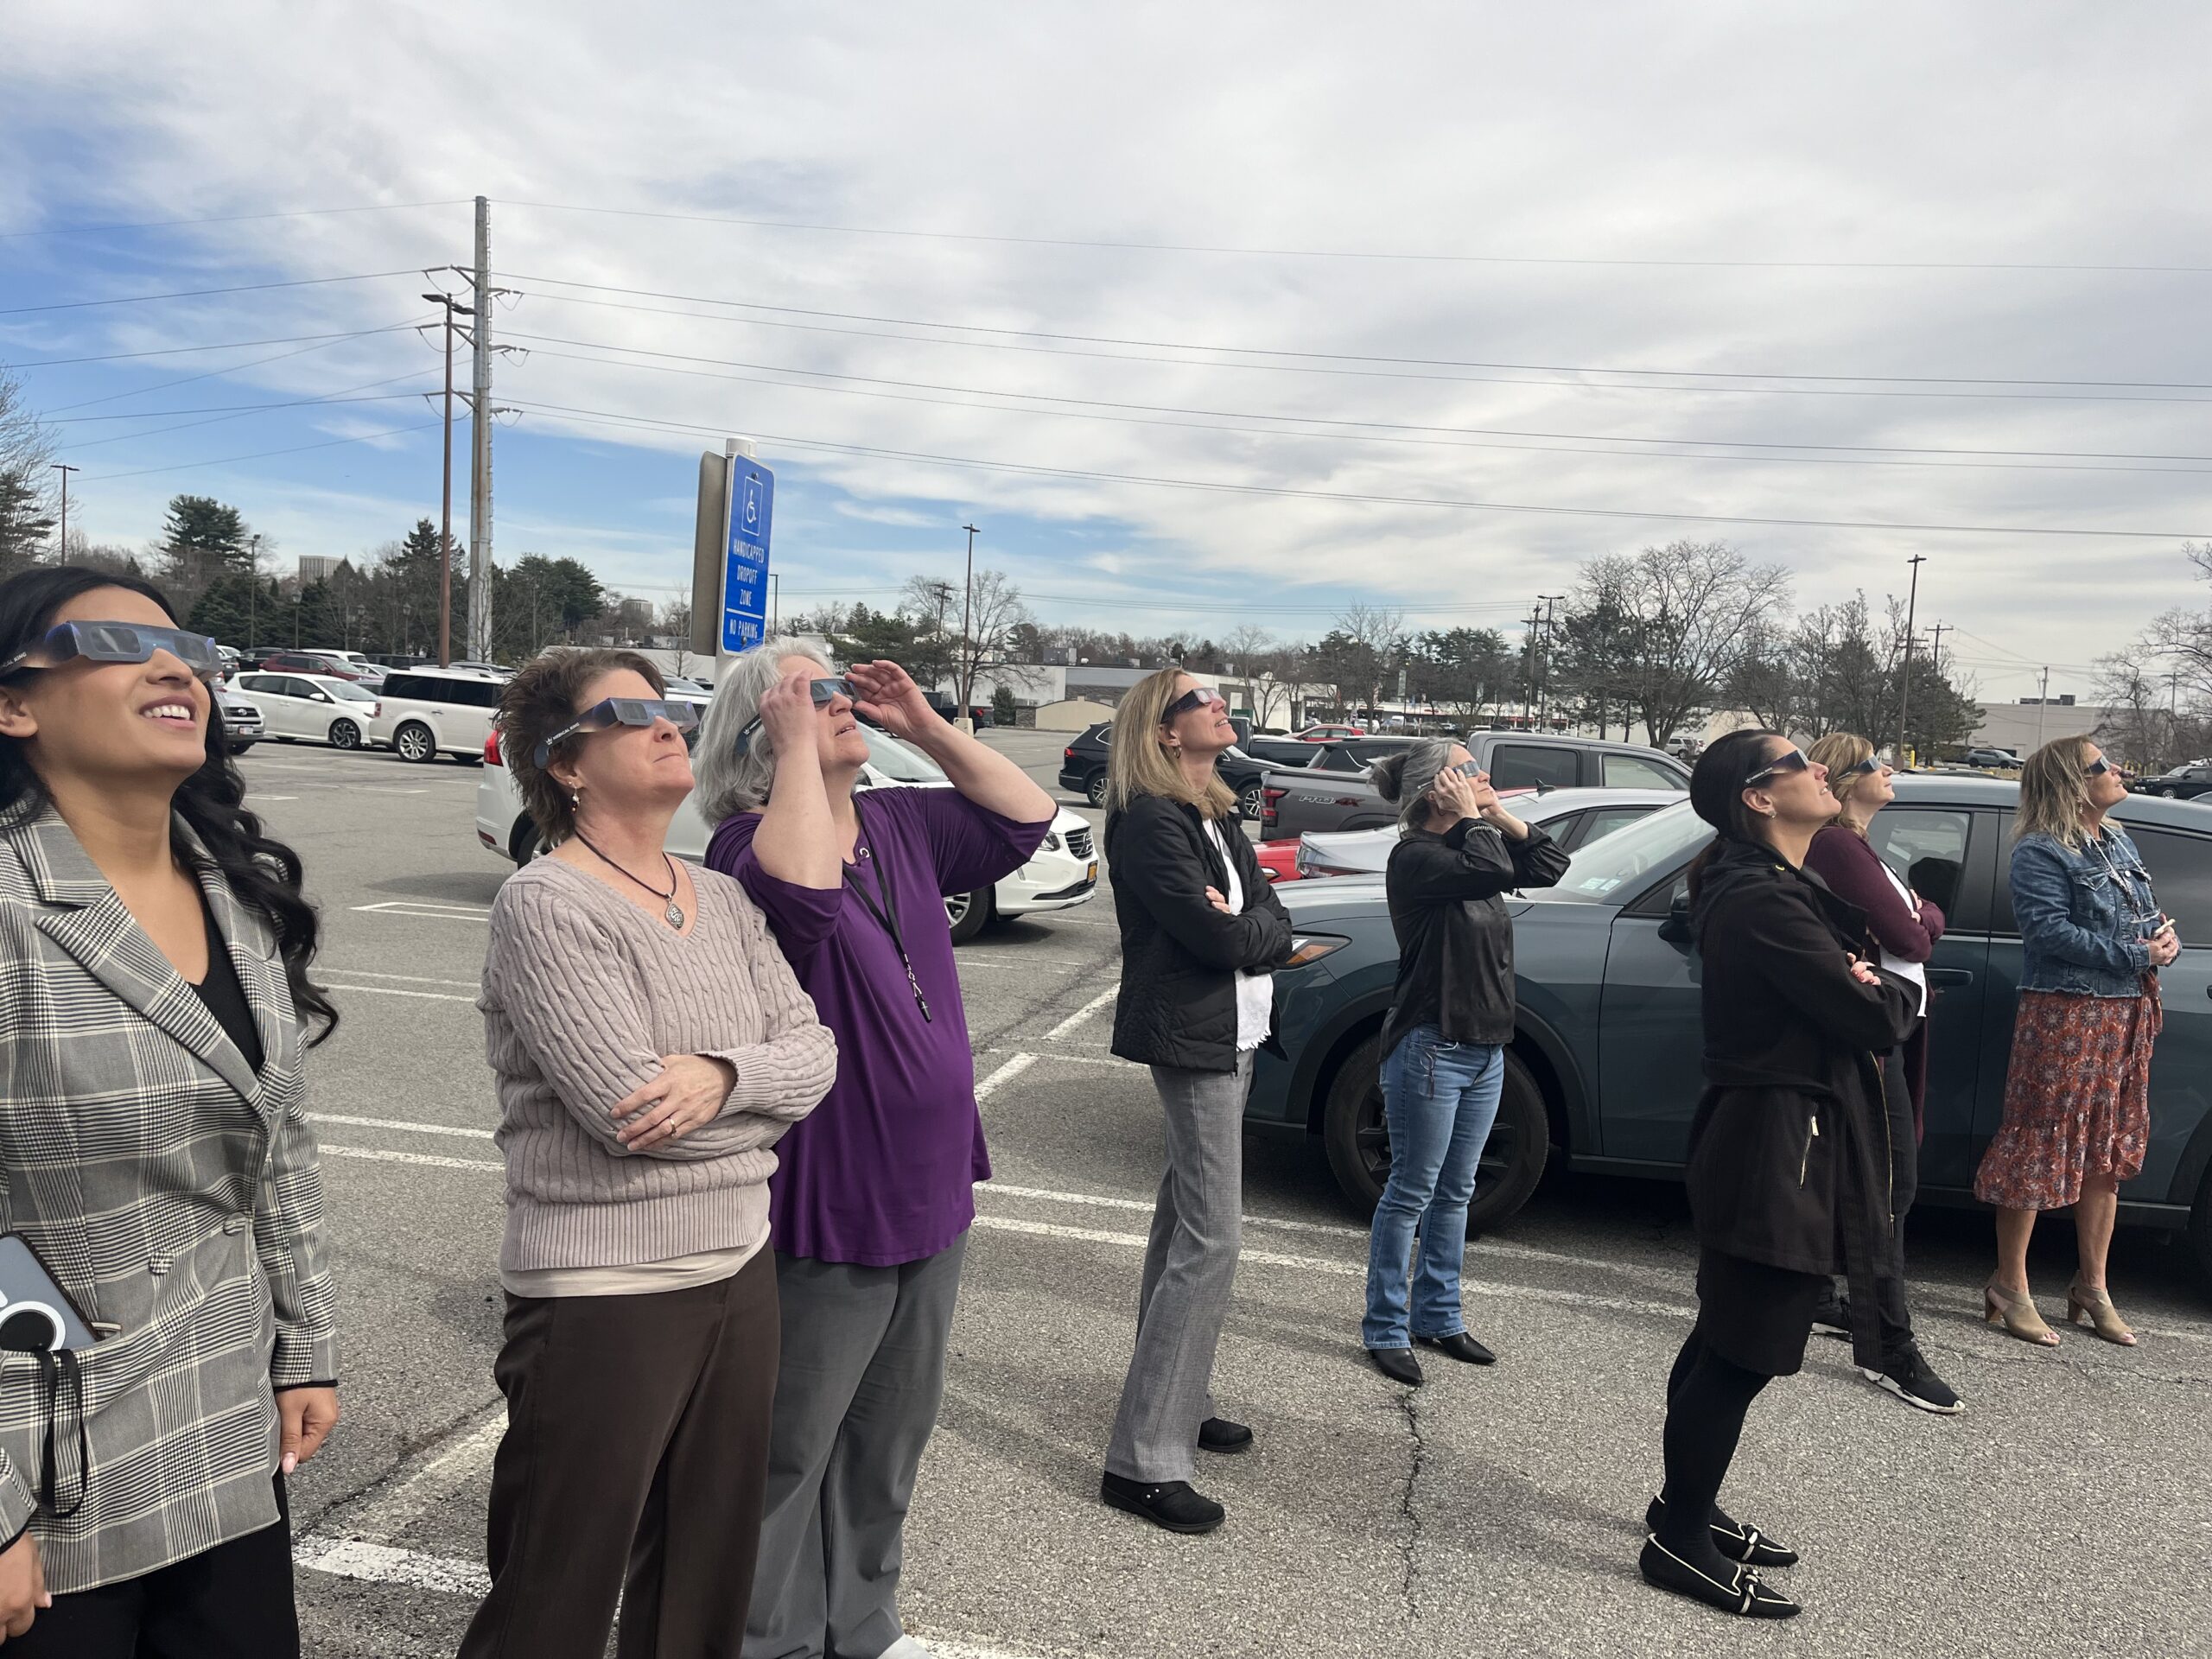 Members of the firm viewing the solar eclipse from the parking lot, wearing solar eclipse viewing glasses.